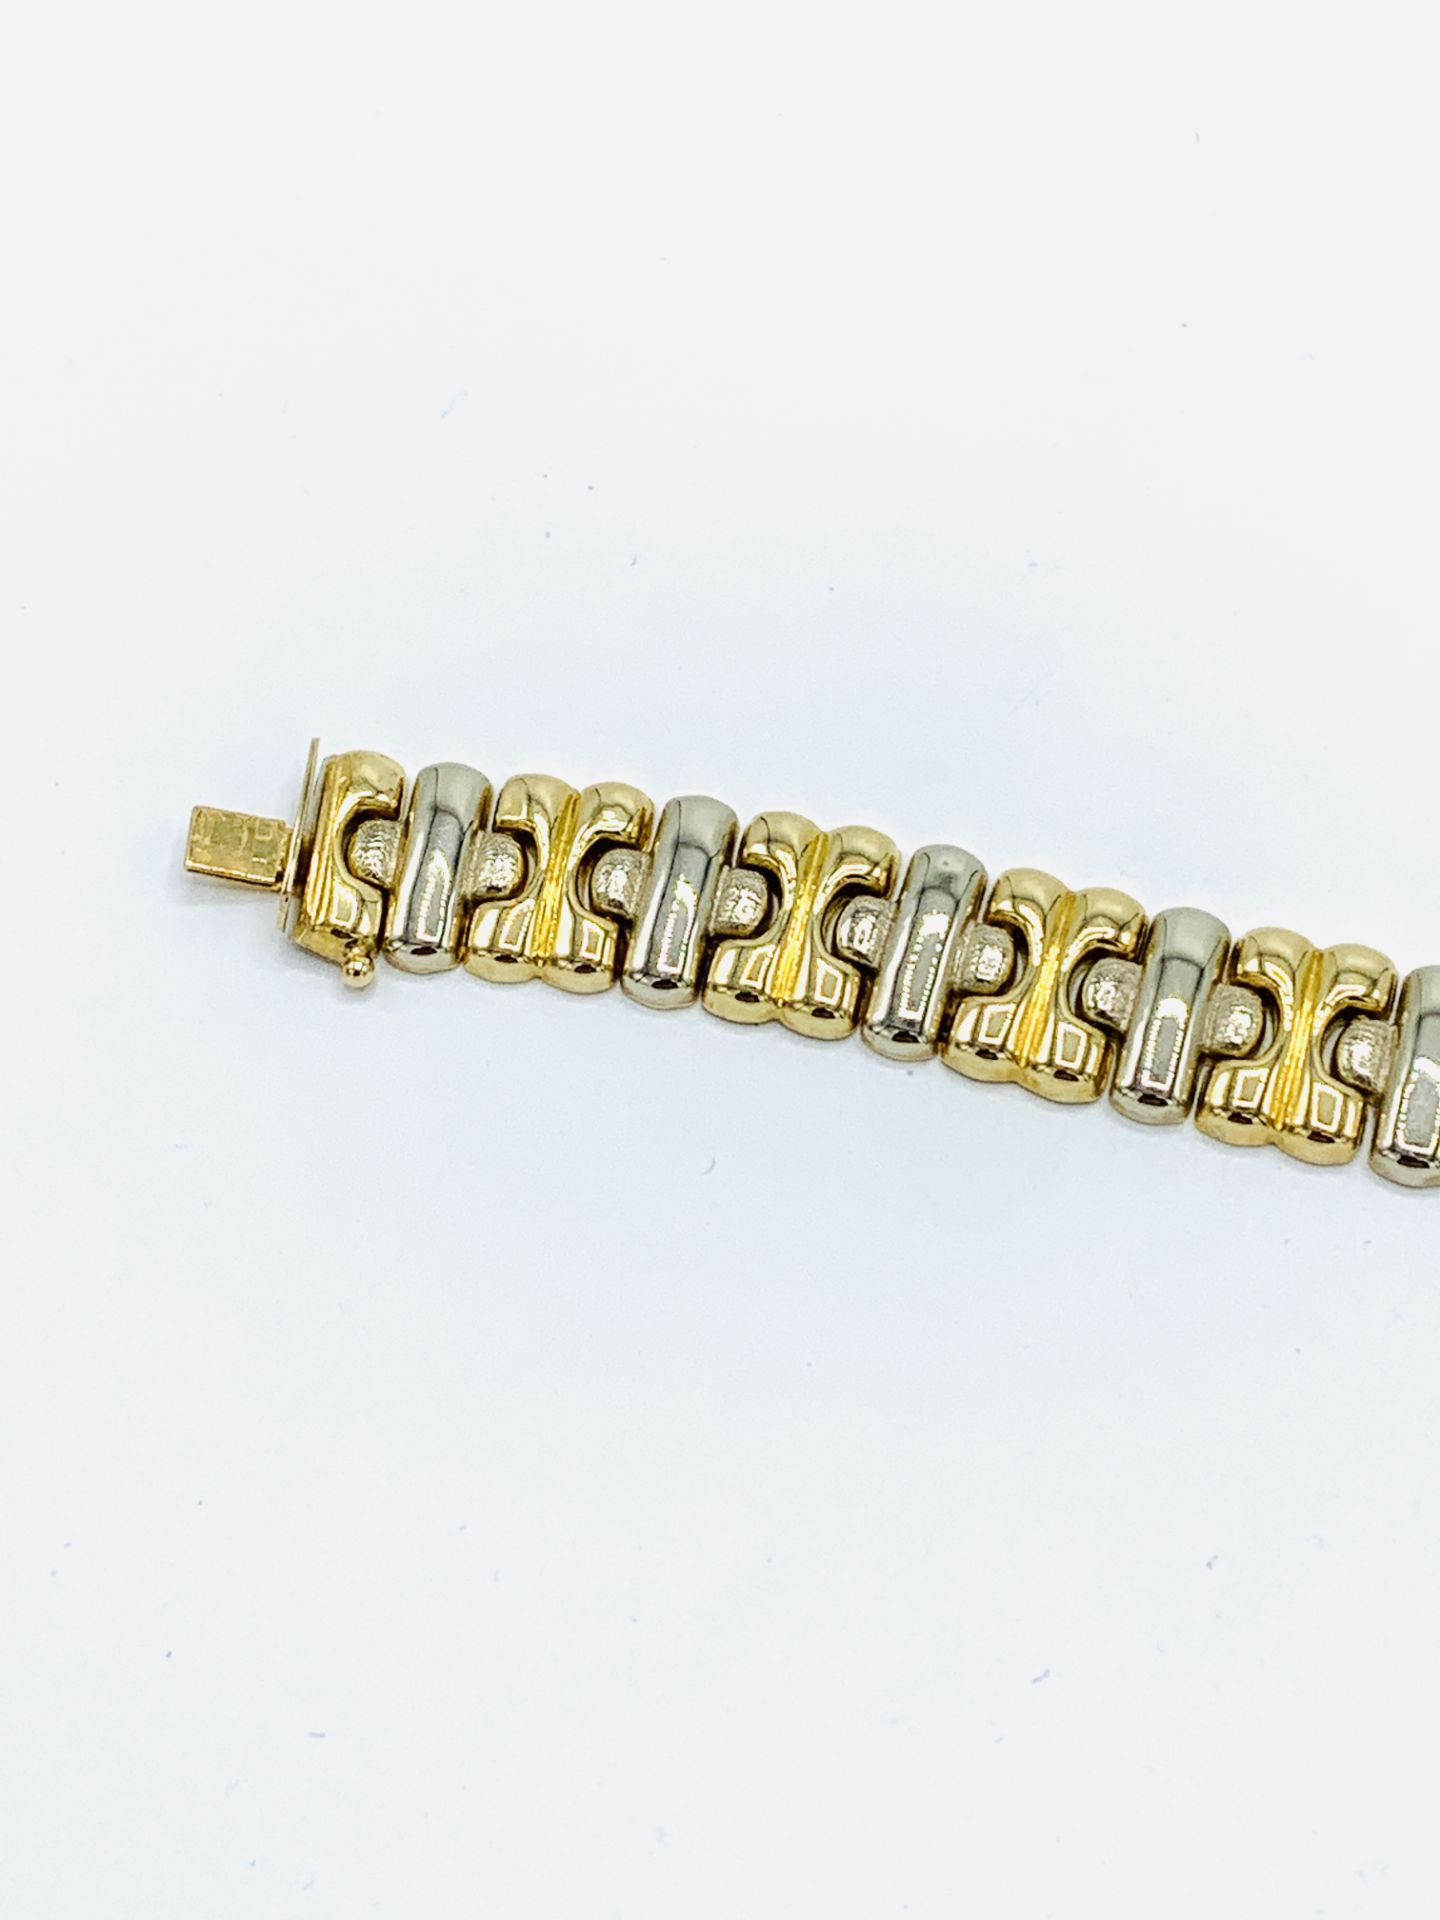 750 white and yellow gold link bracelet - Image 3 of 5